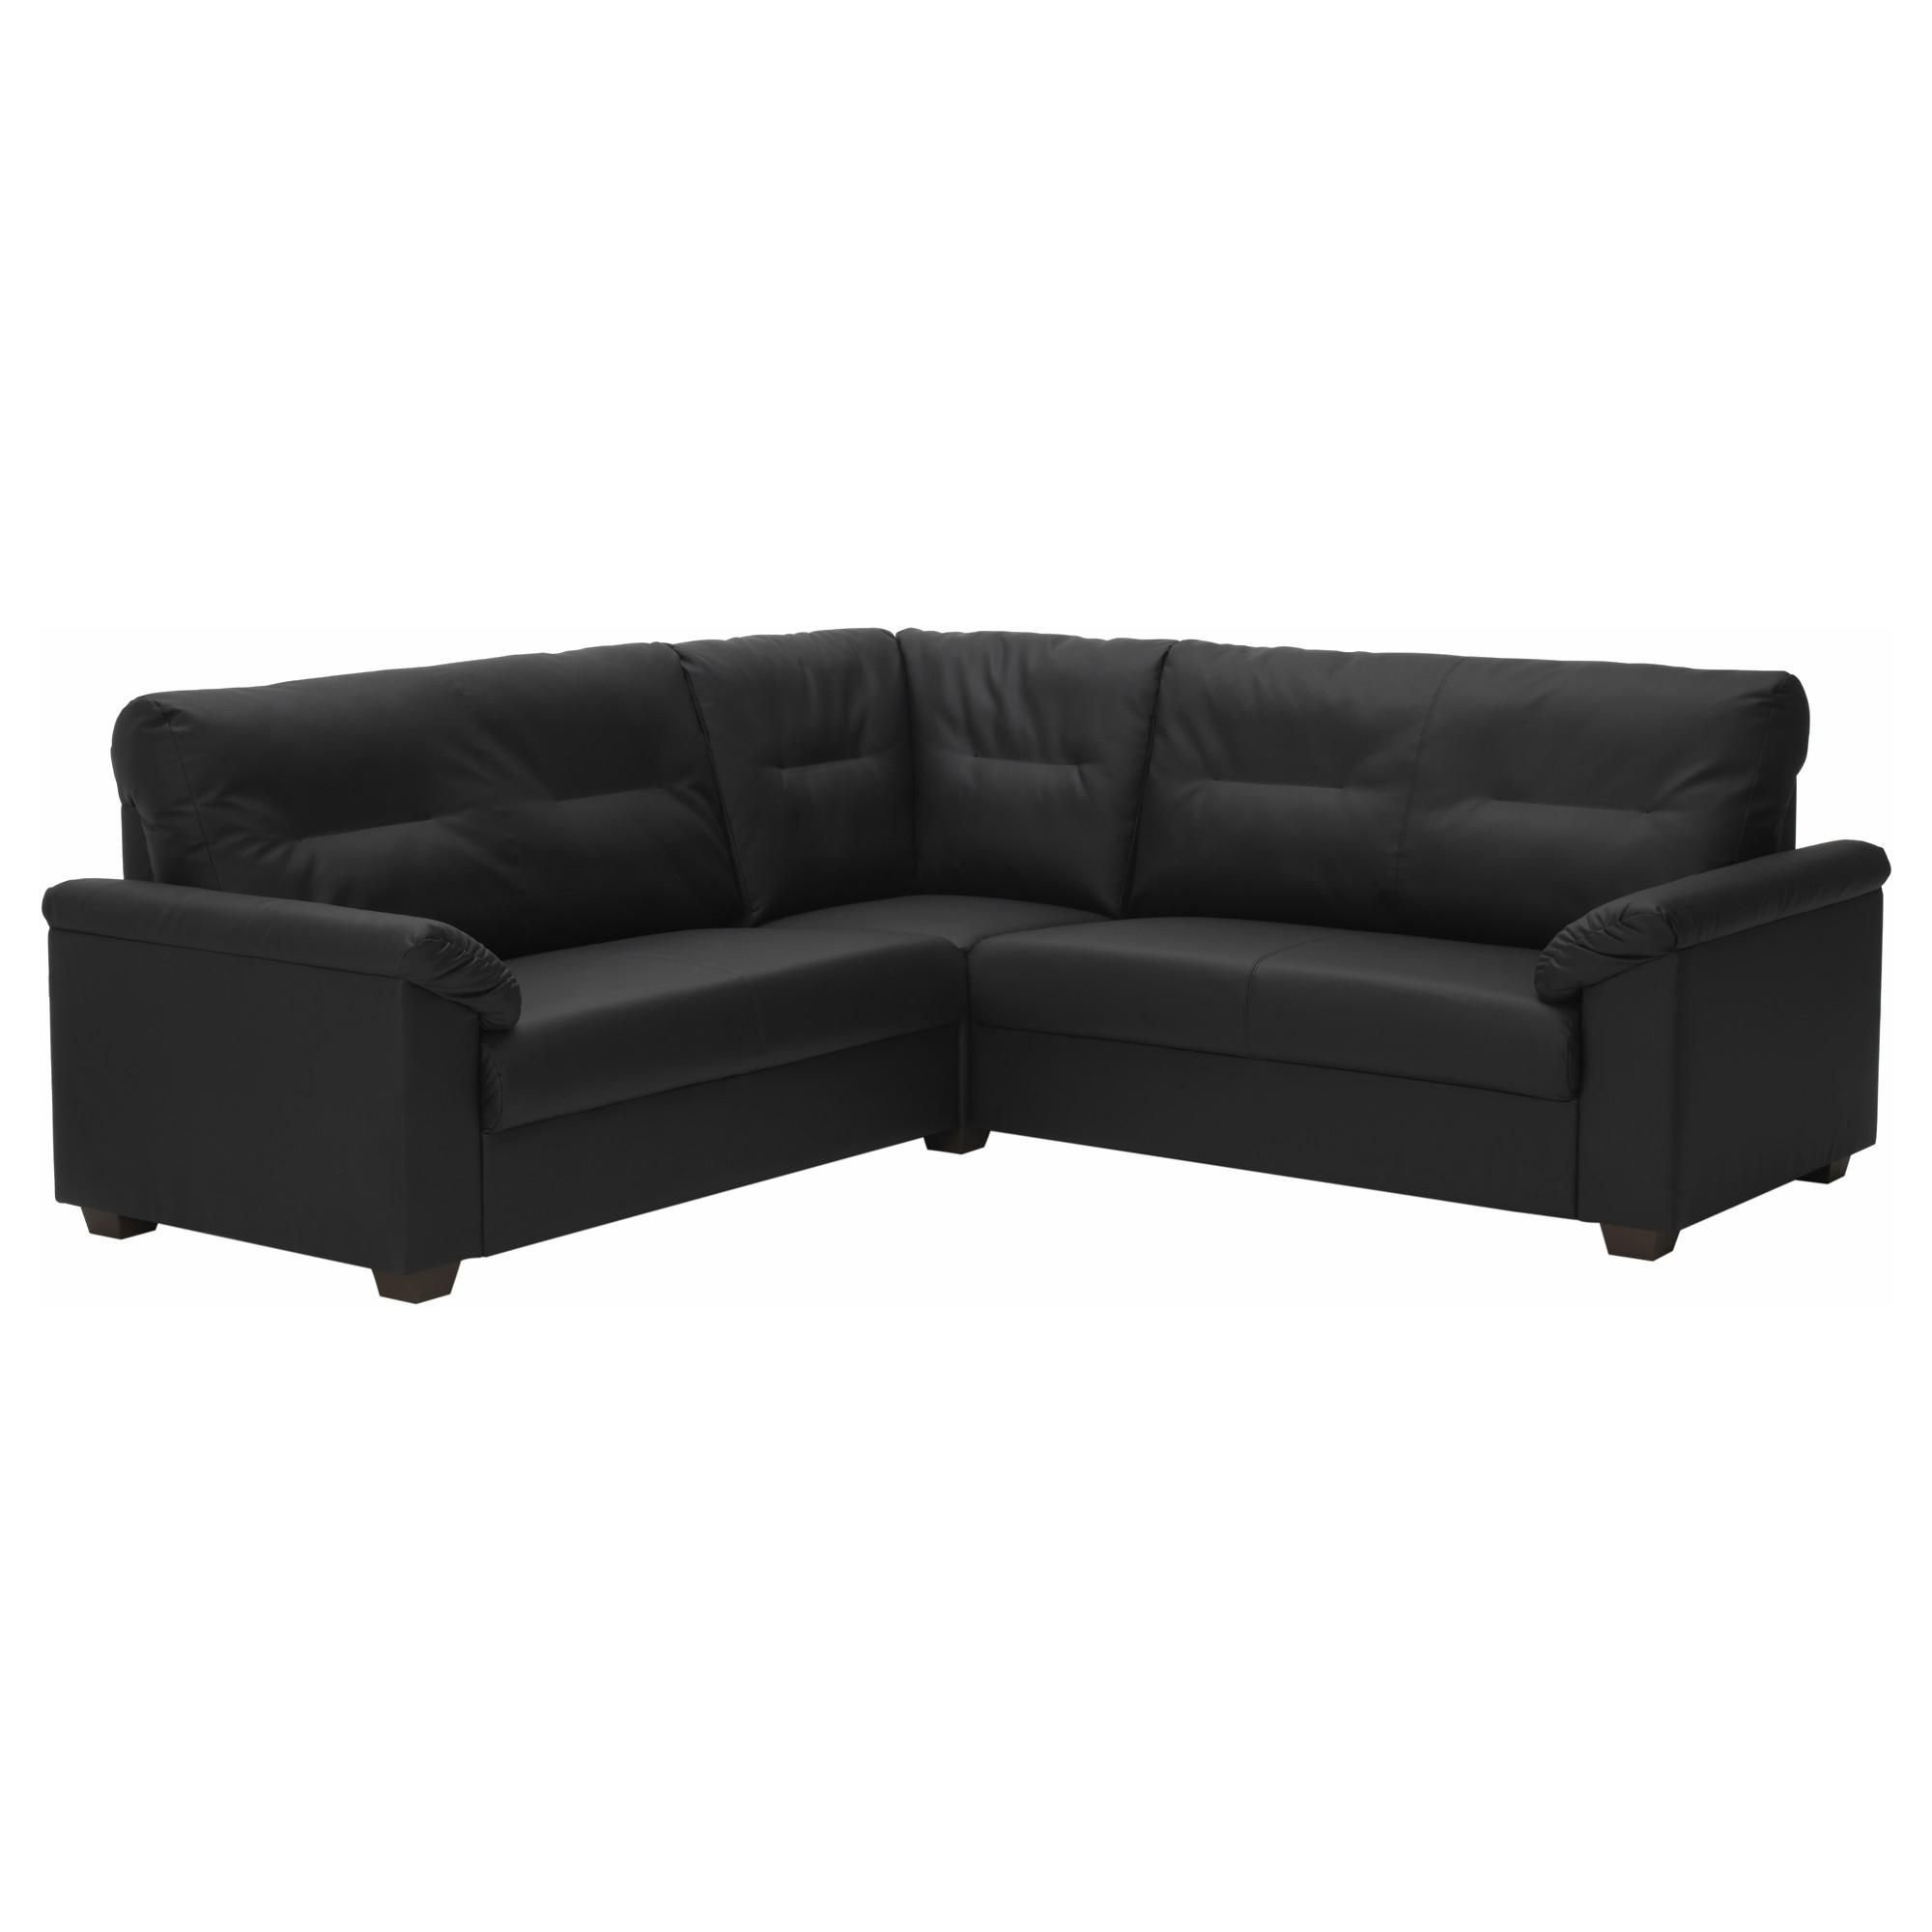 Leather & Faux Leather Couches, Chairs & Ottomans – Ikea Regarding 4 Seat Leather Sofas (View 4 of 20)